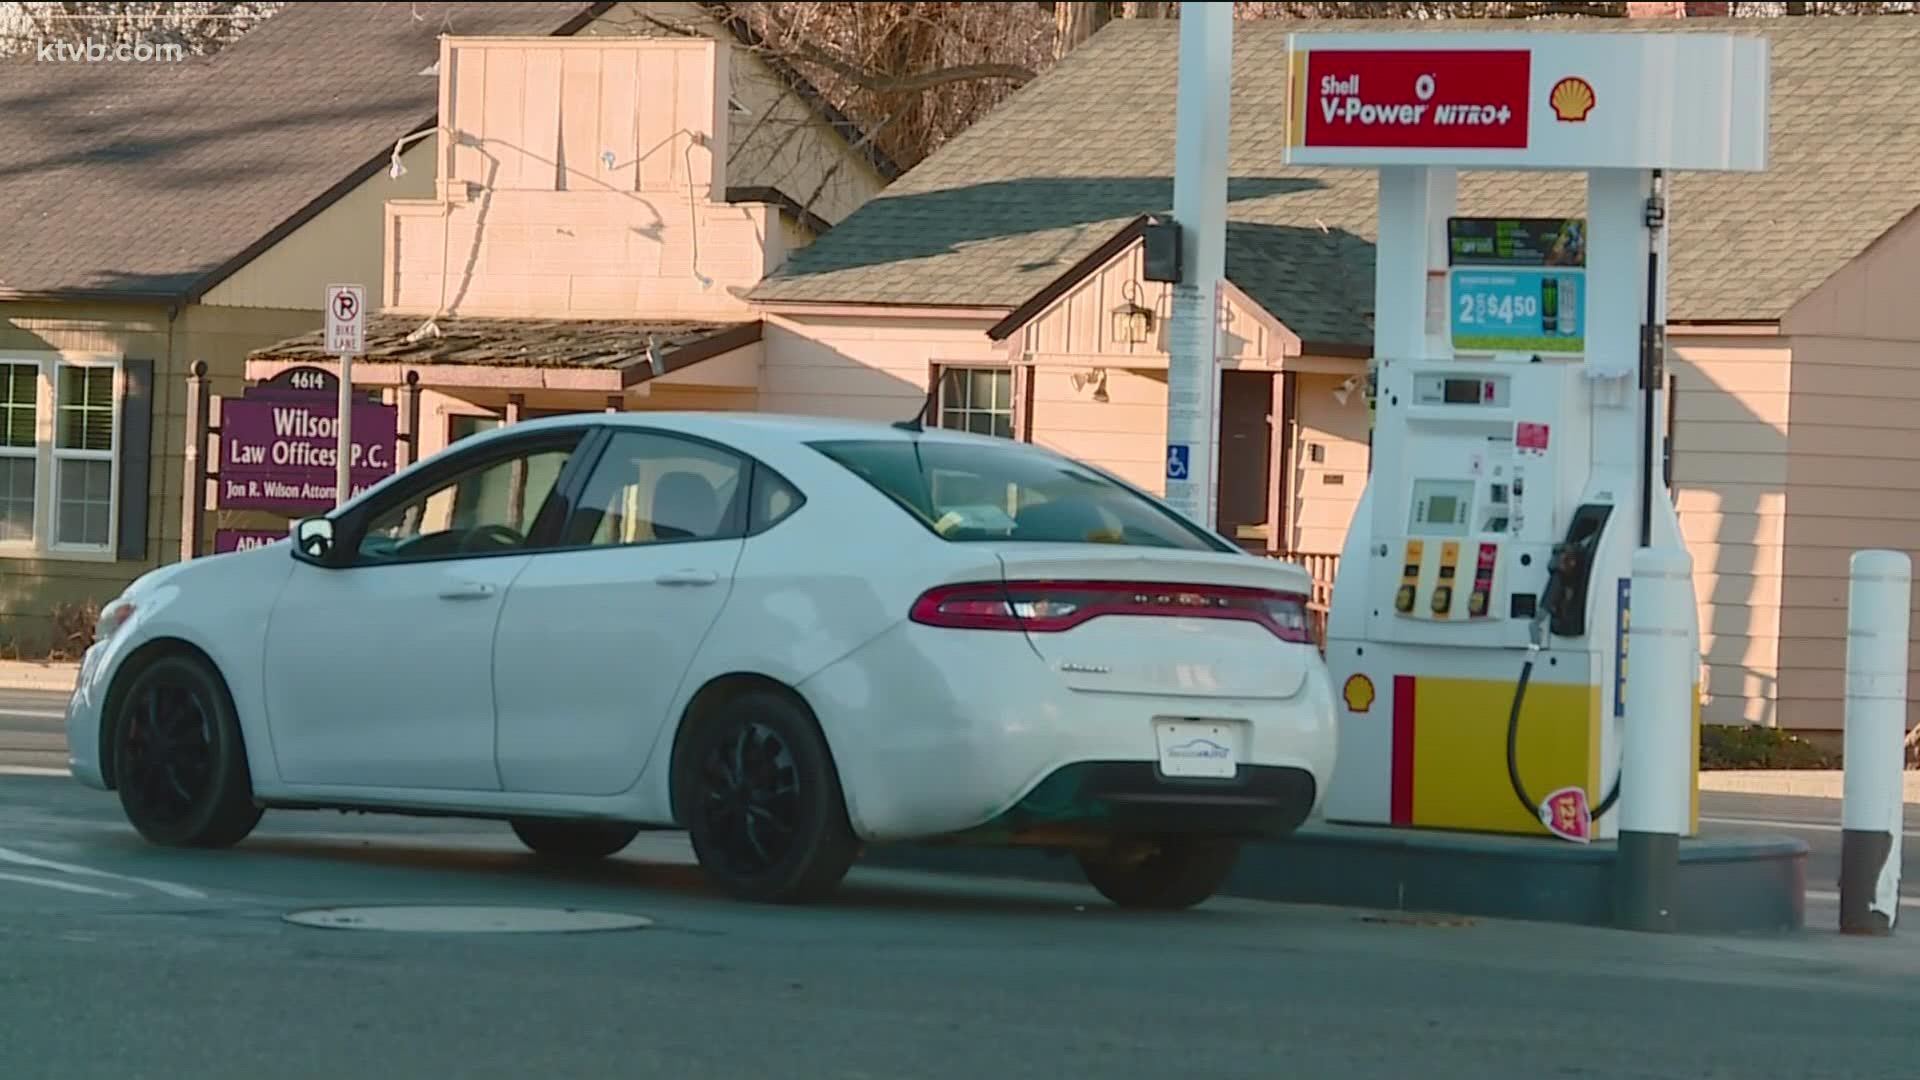 The Gem State record was set Tuesday. The cost of gas in Idaho averaged $2.96 a year ago, which is 84 cents lower than Thursday's price of $4.36, according to AAA.